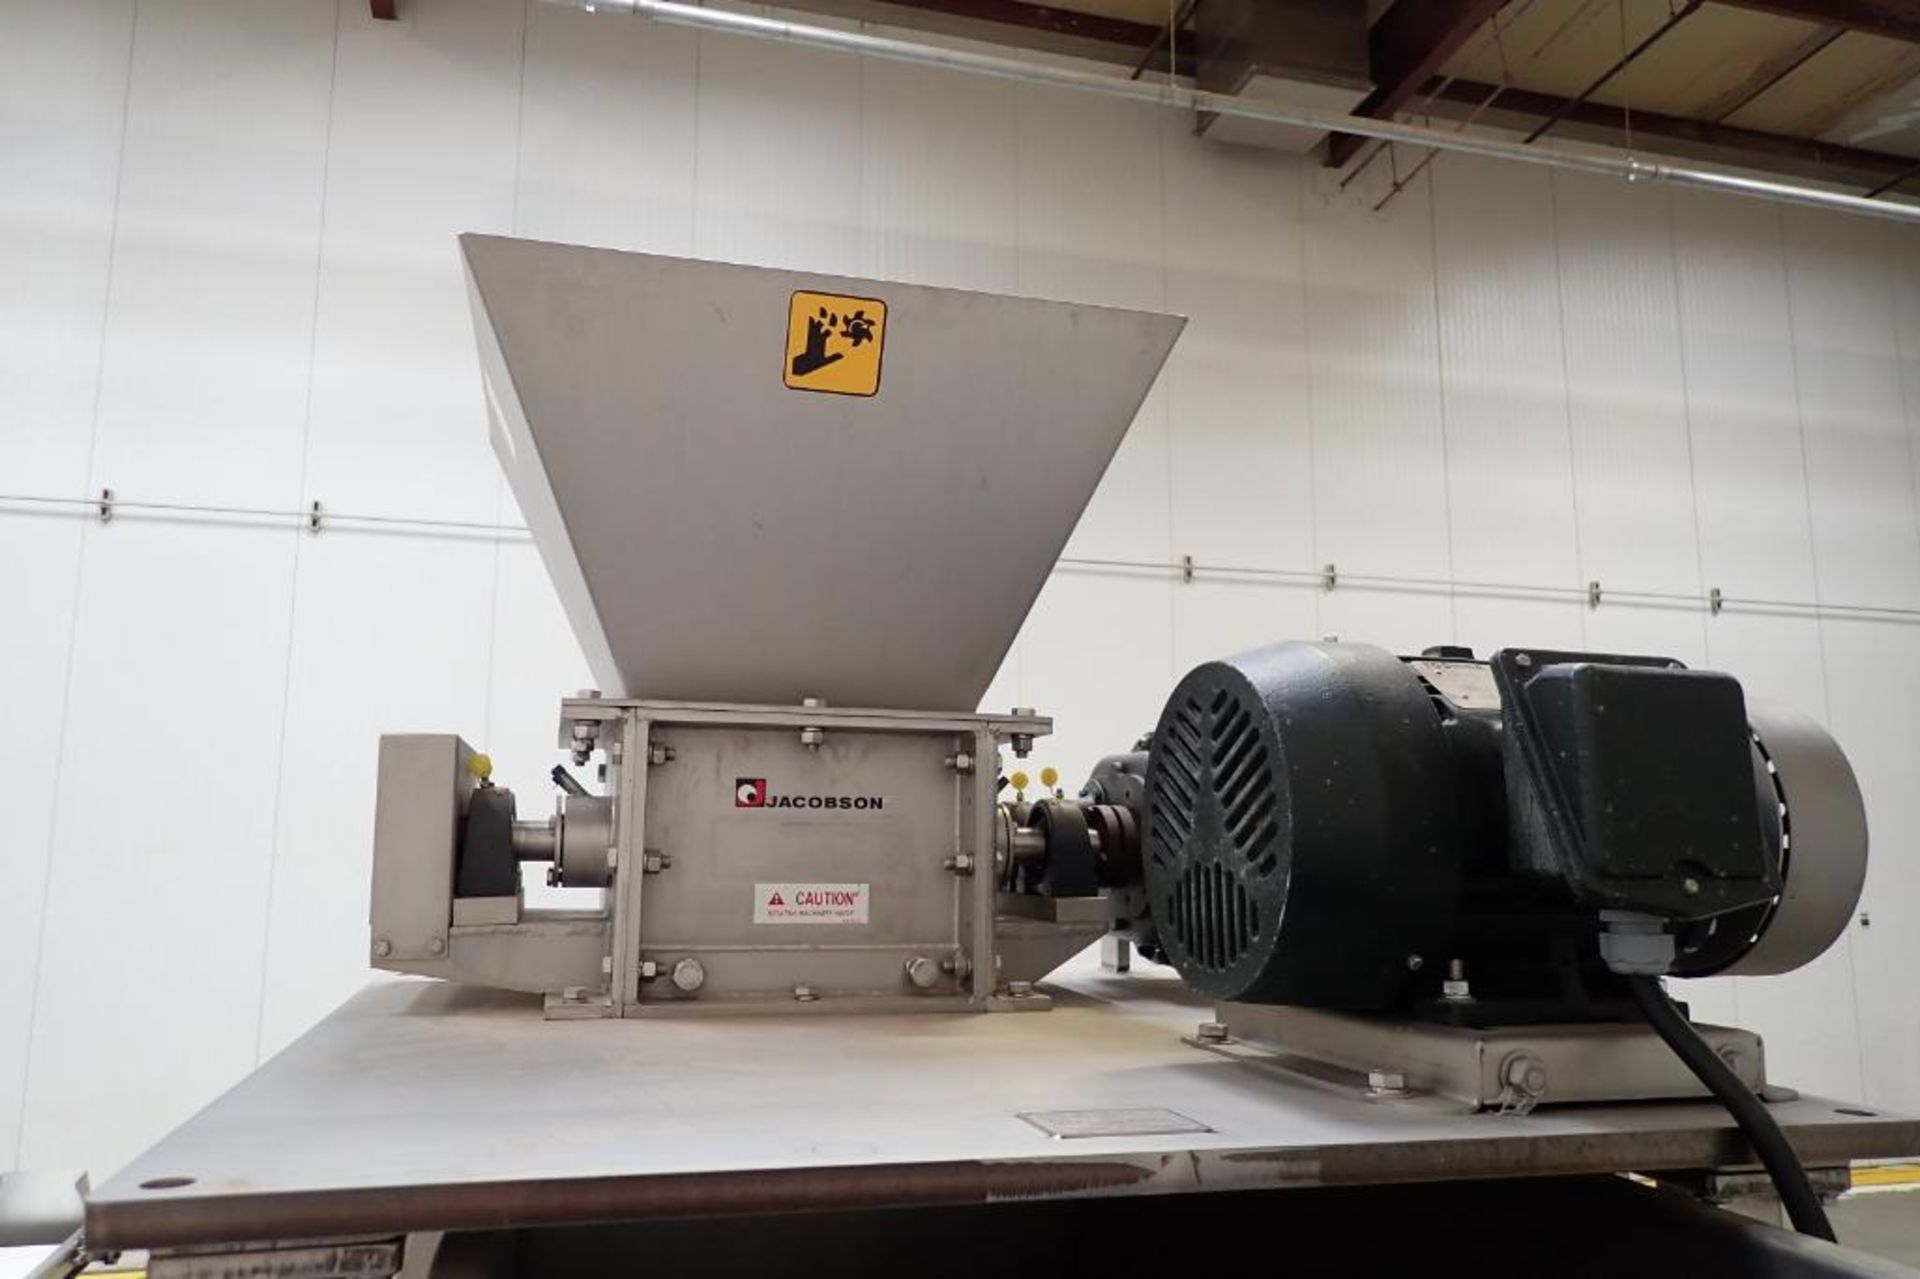 2013 Jacobson lump buster, Model 1212 Lump Buster, SN CD016514, with SS vibratory scalper, SS frame - Image 9 of 13